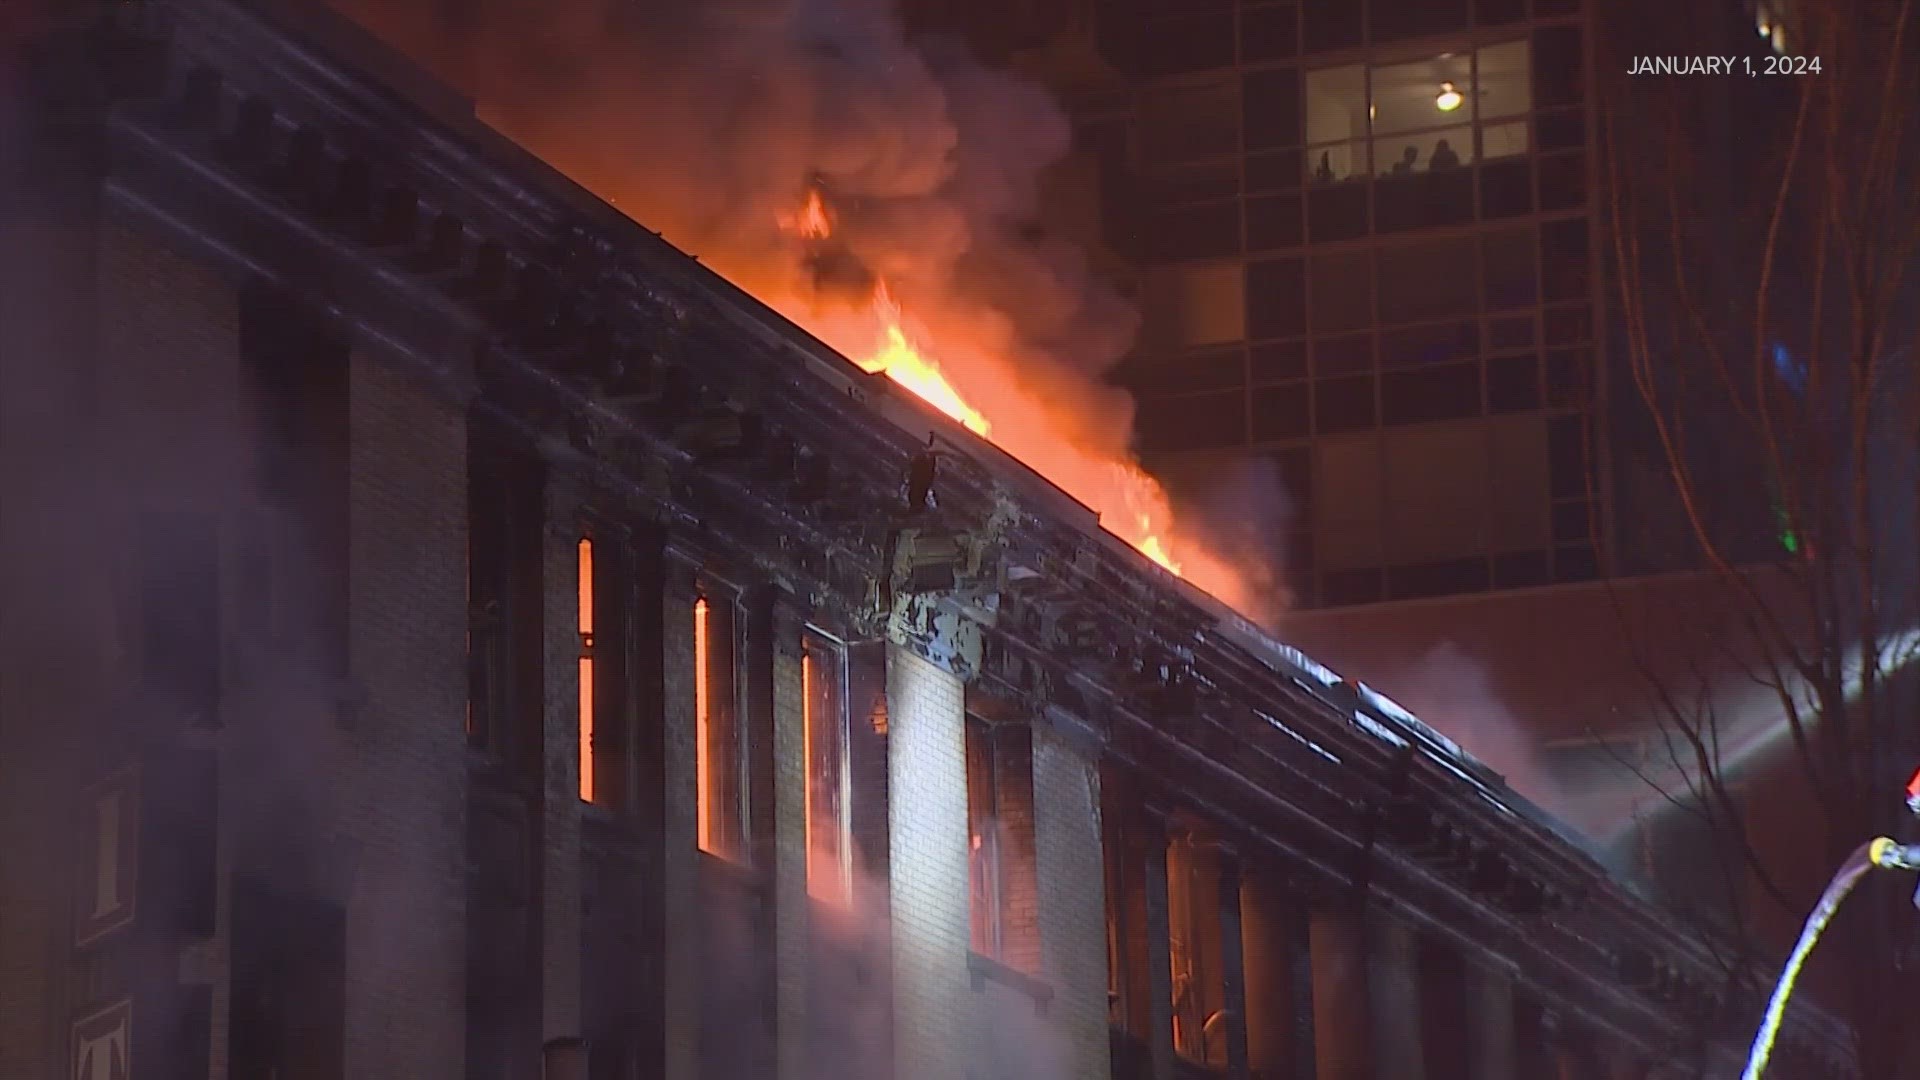 In 2021, there were 25 vacant building fires. In 2023, that number jumped to 42 fires.